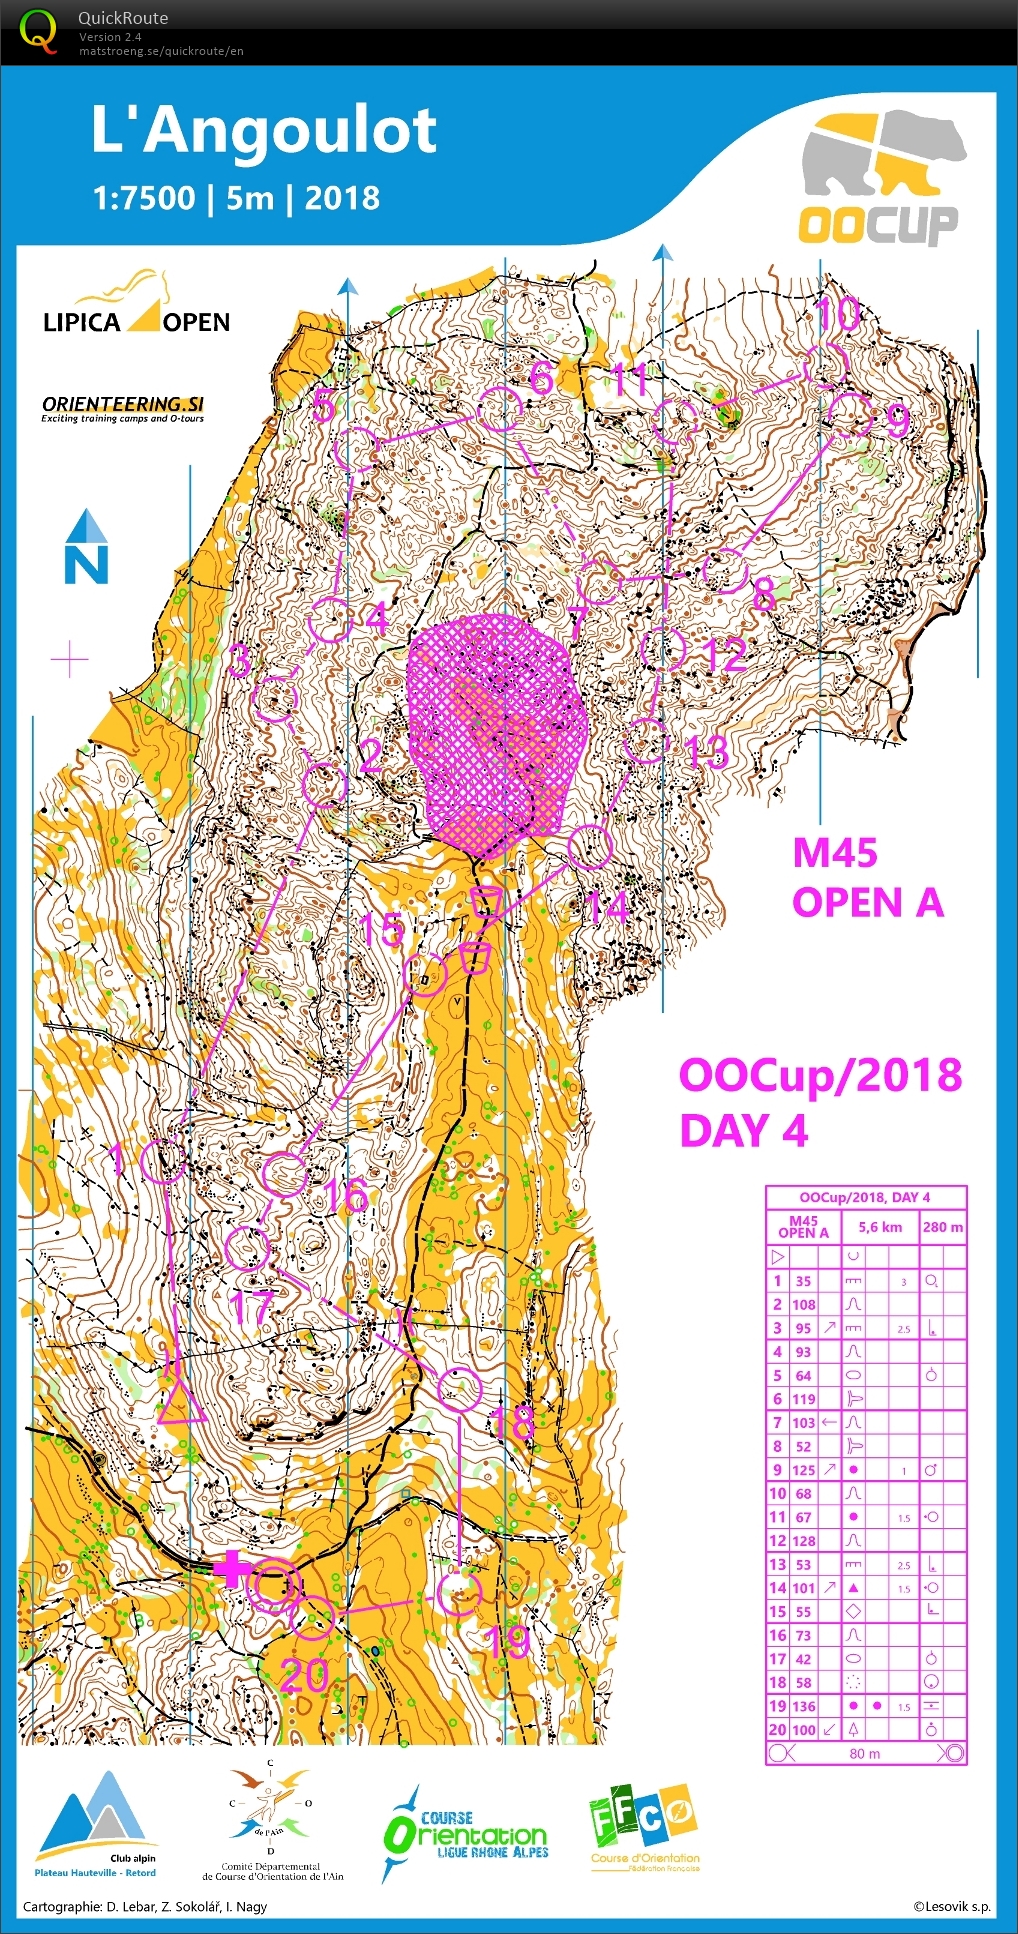 OOcup2018 OPEN A - Day4 (28.07.2018)